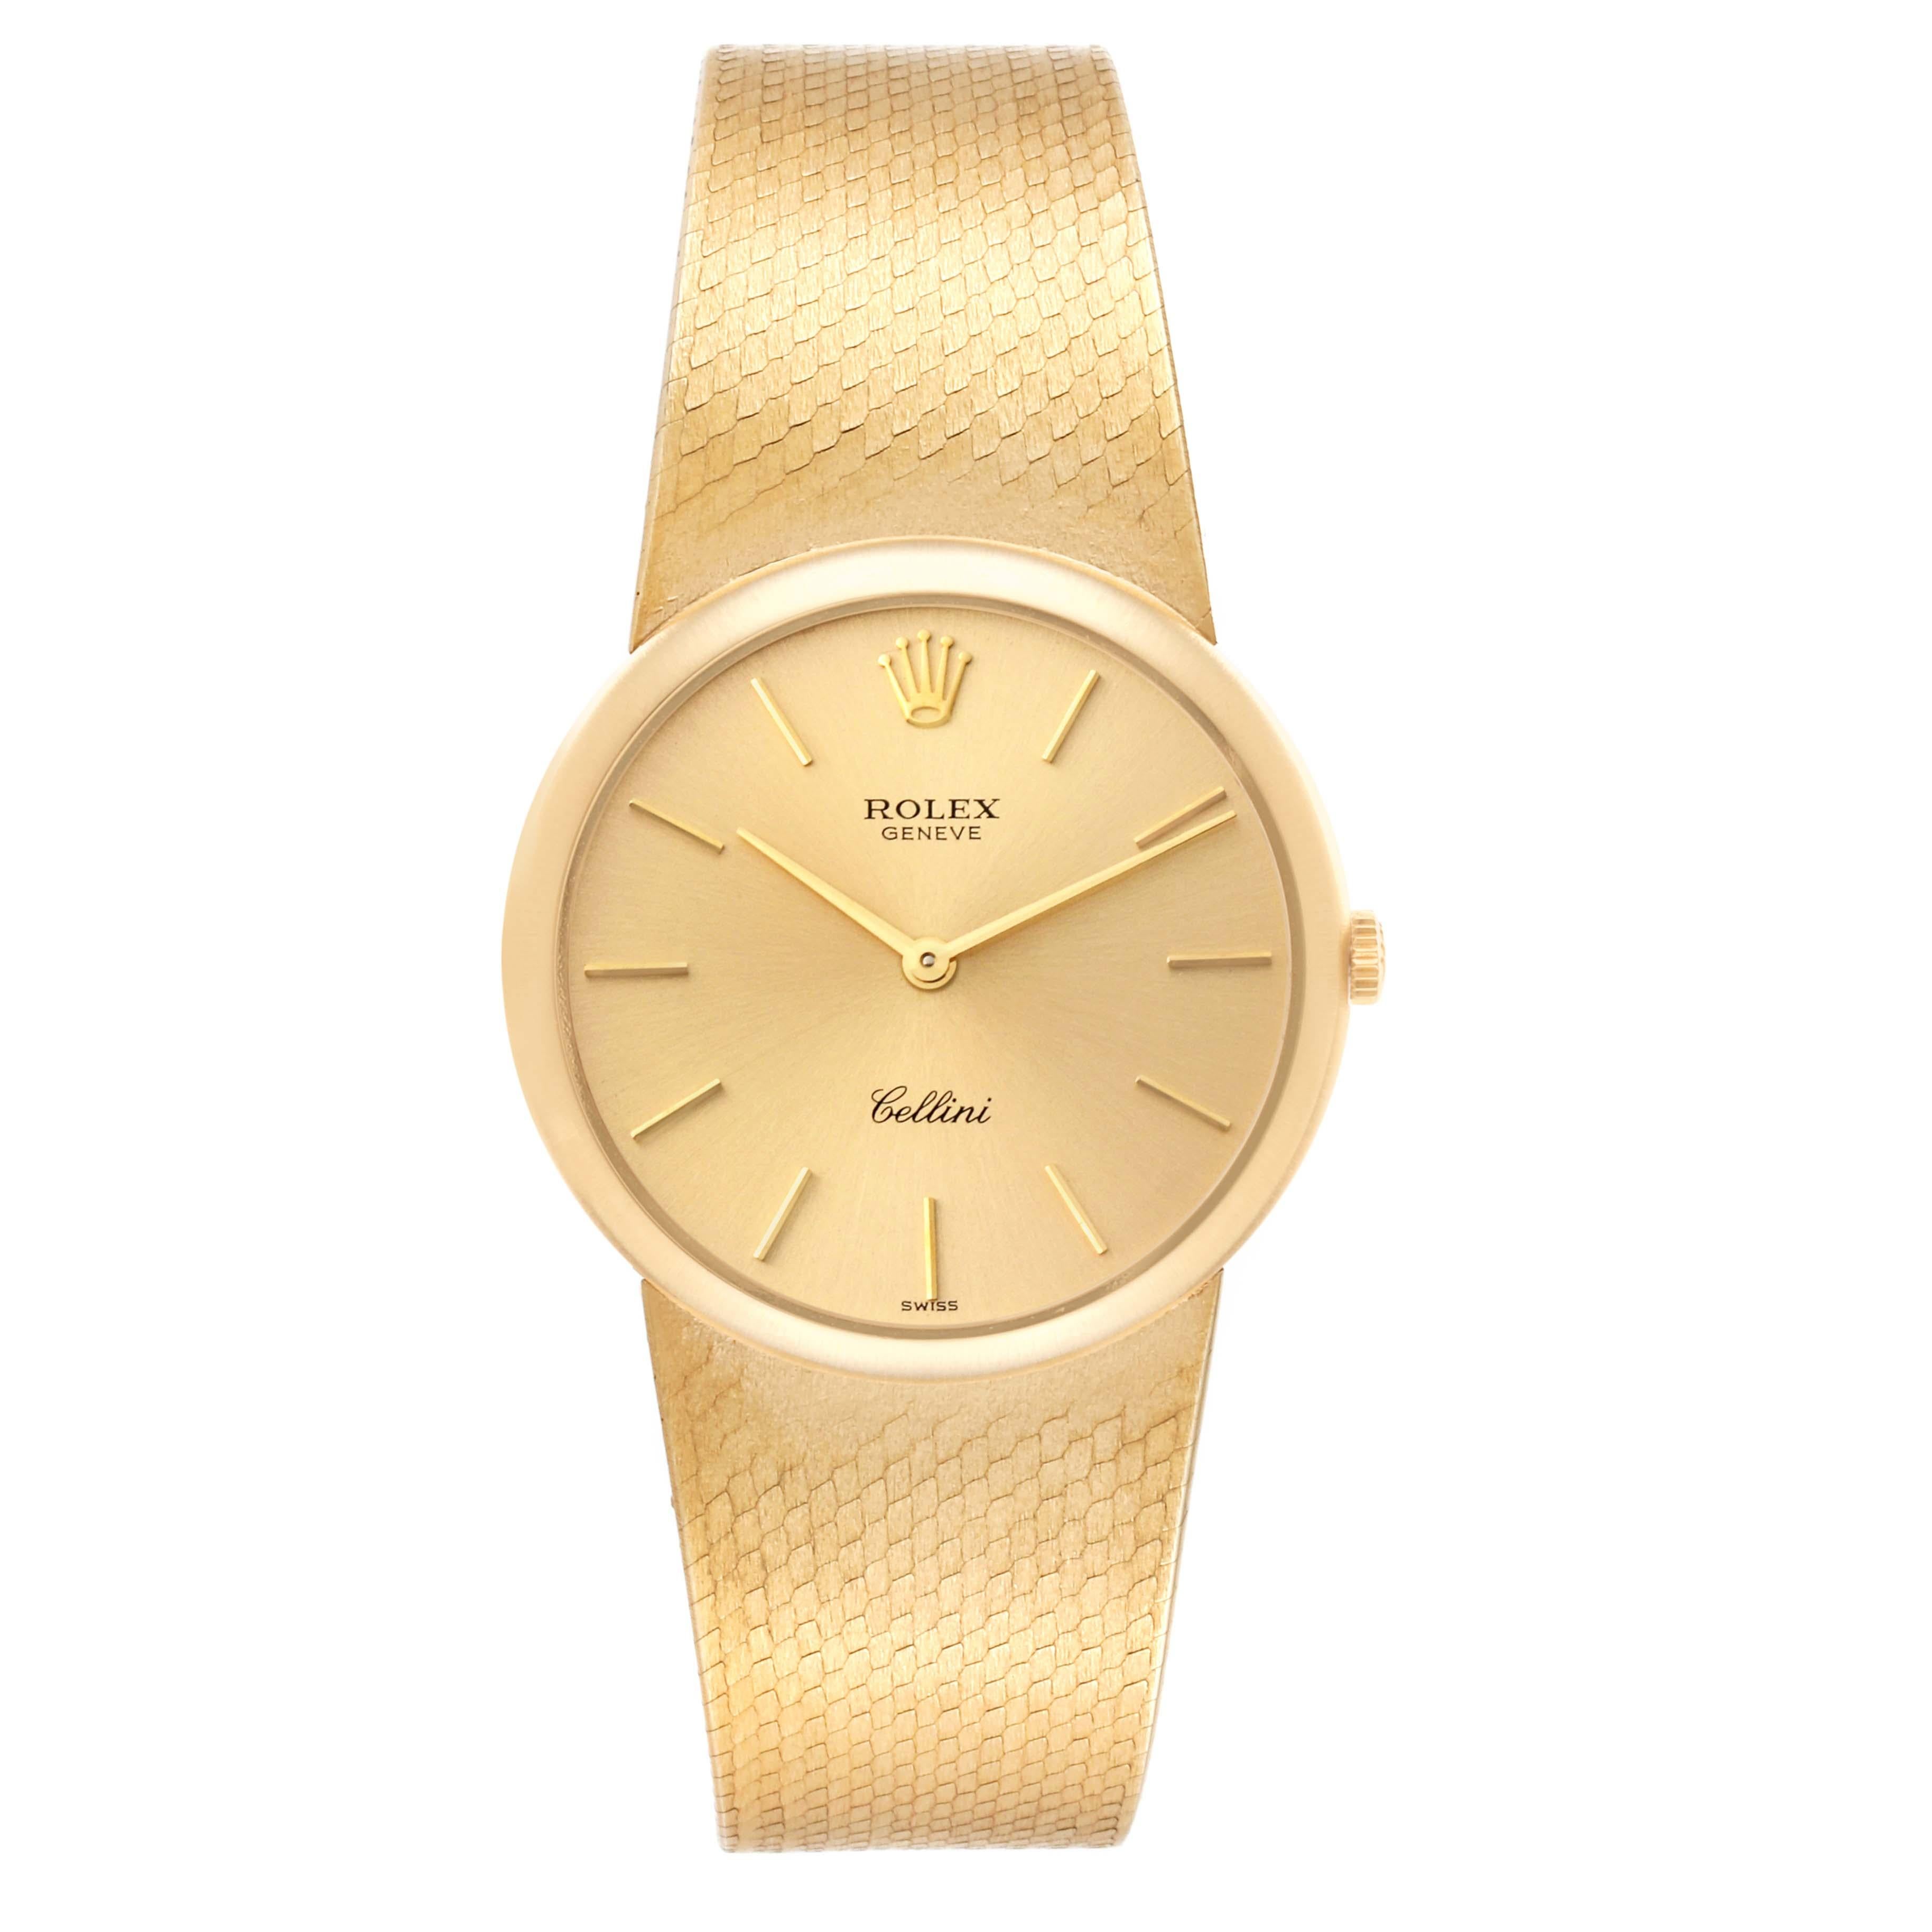 Rolex Cellini Yellow Gold Vintage Ladies Watch 653 For Sale 1